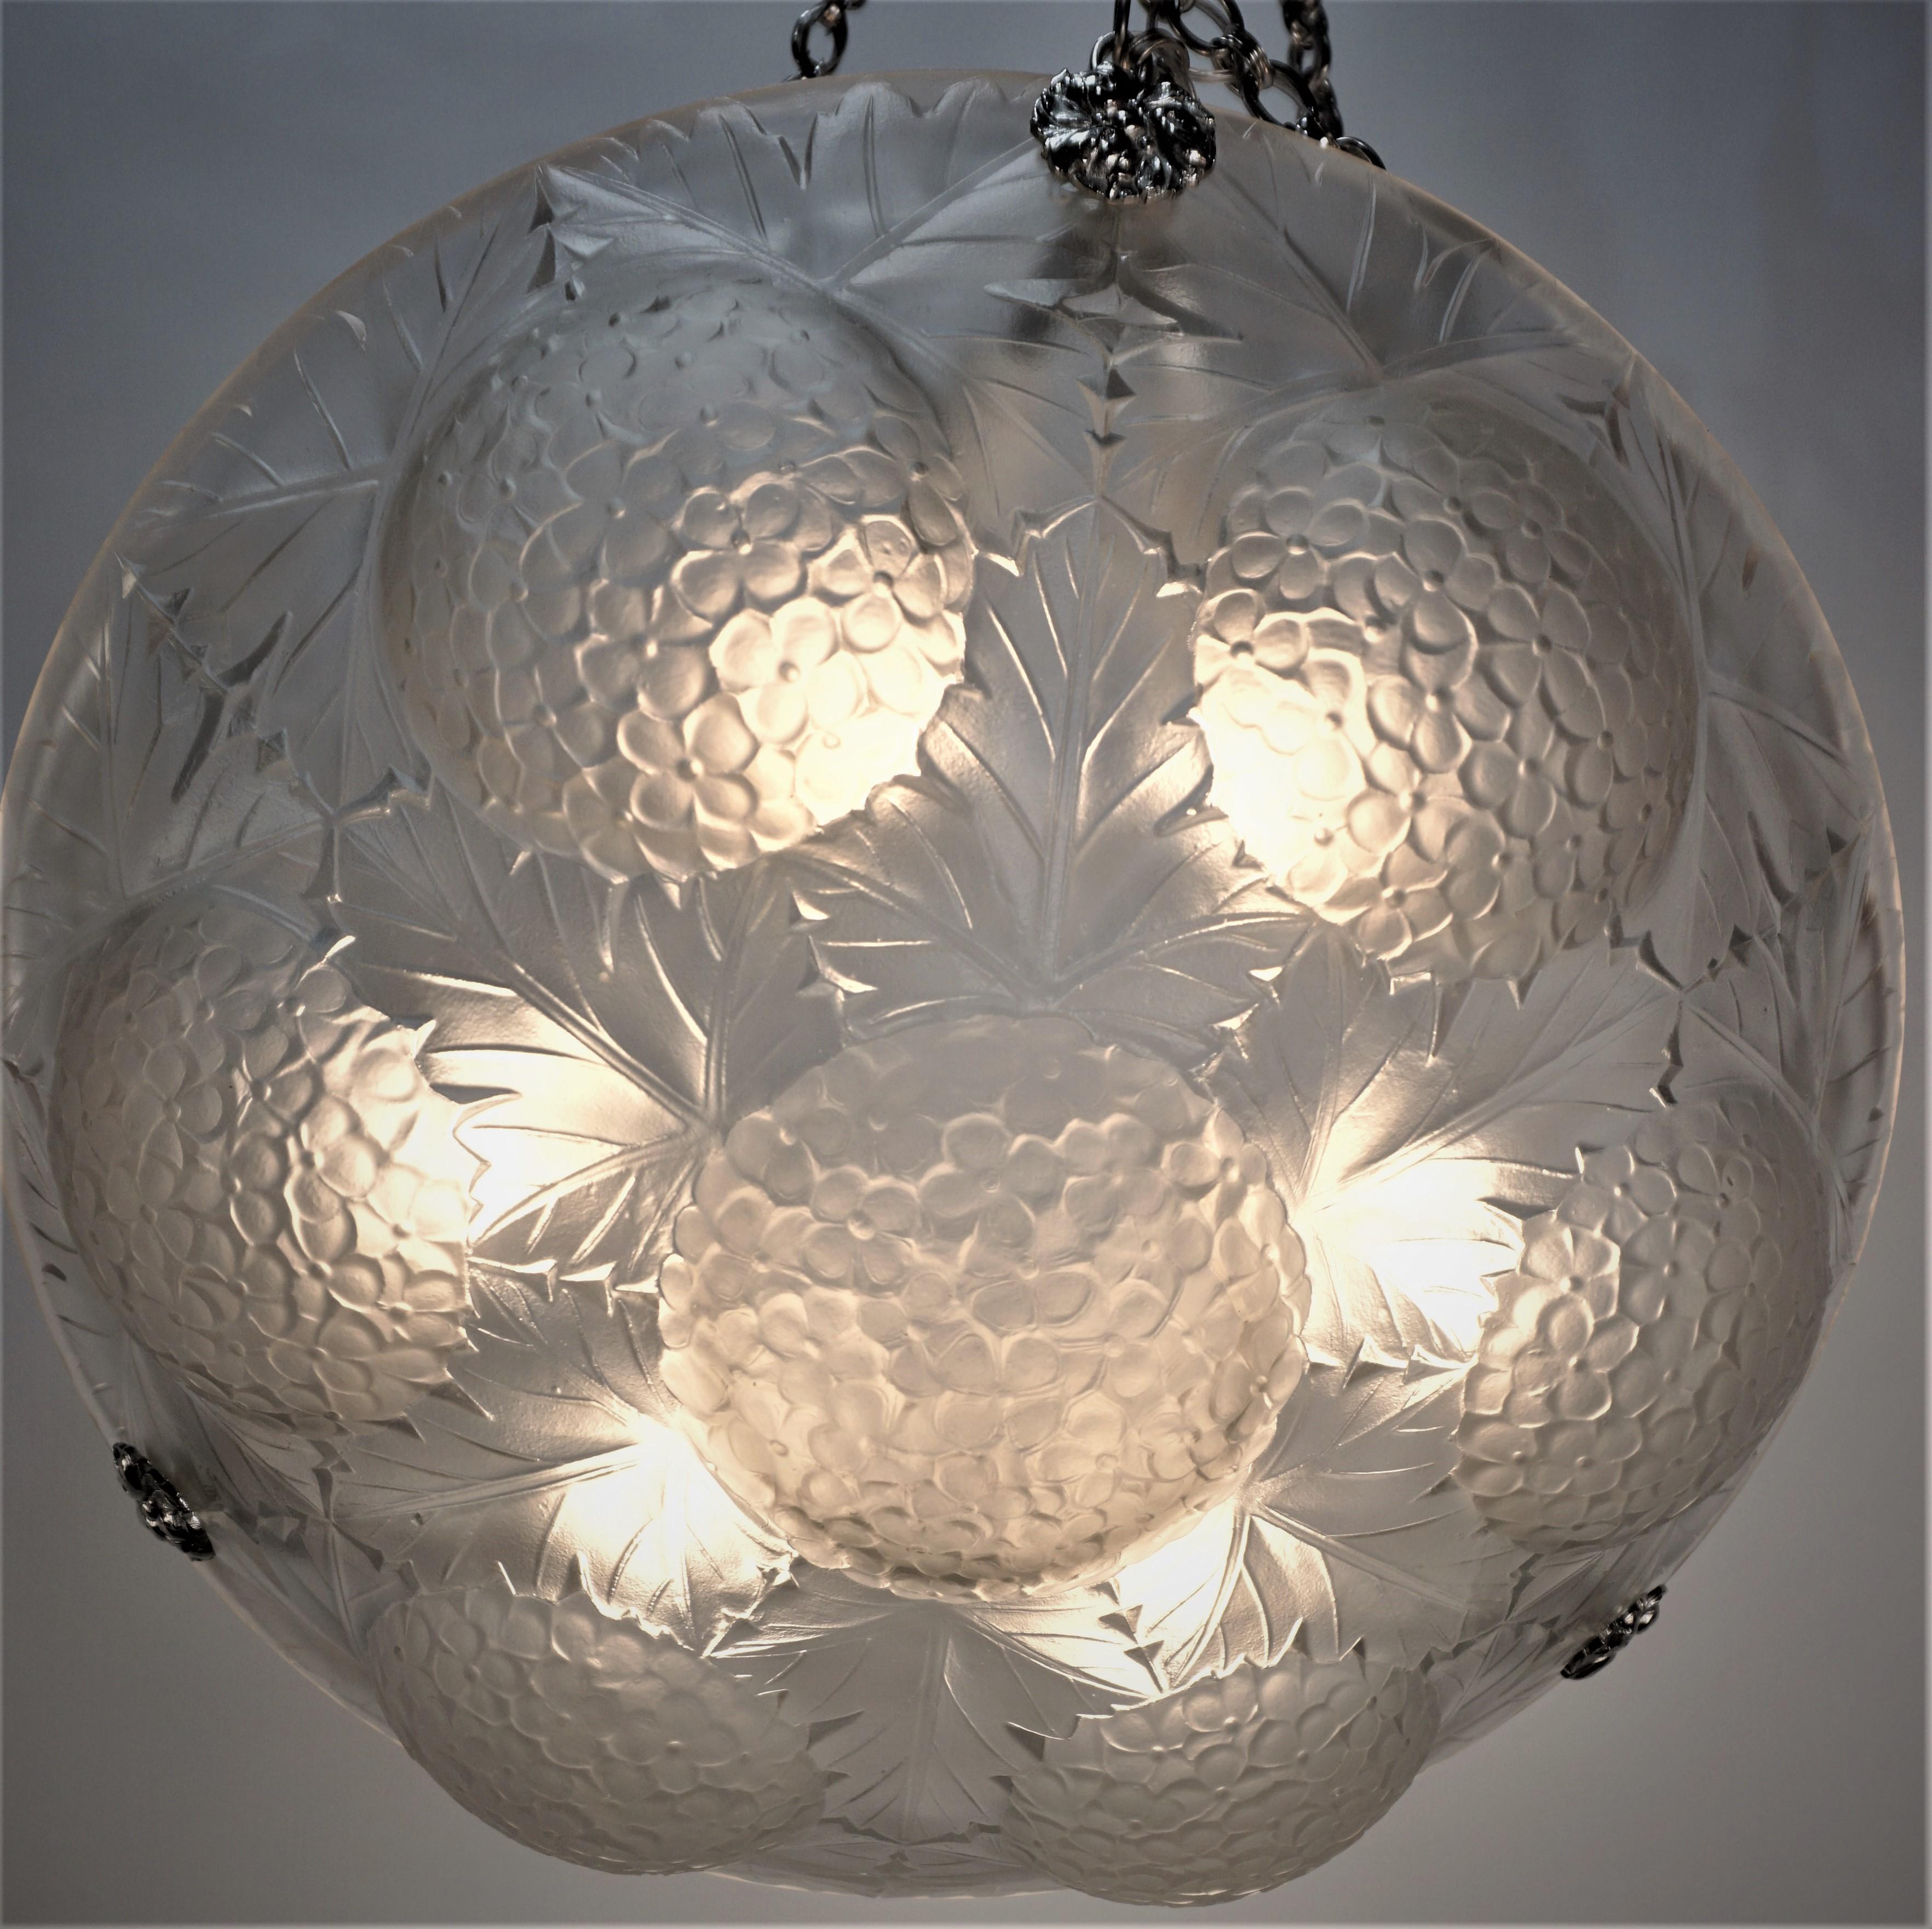 A fantastic large clear frost flora design Art Deco pendant chandelier.
Professionally rewired ready for in stallion has six lights, 60 watts max each.